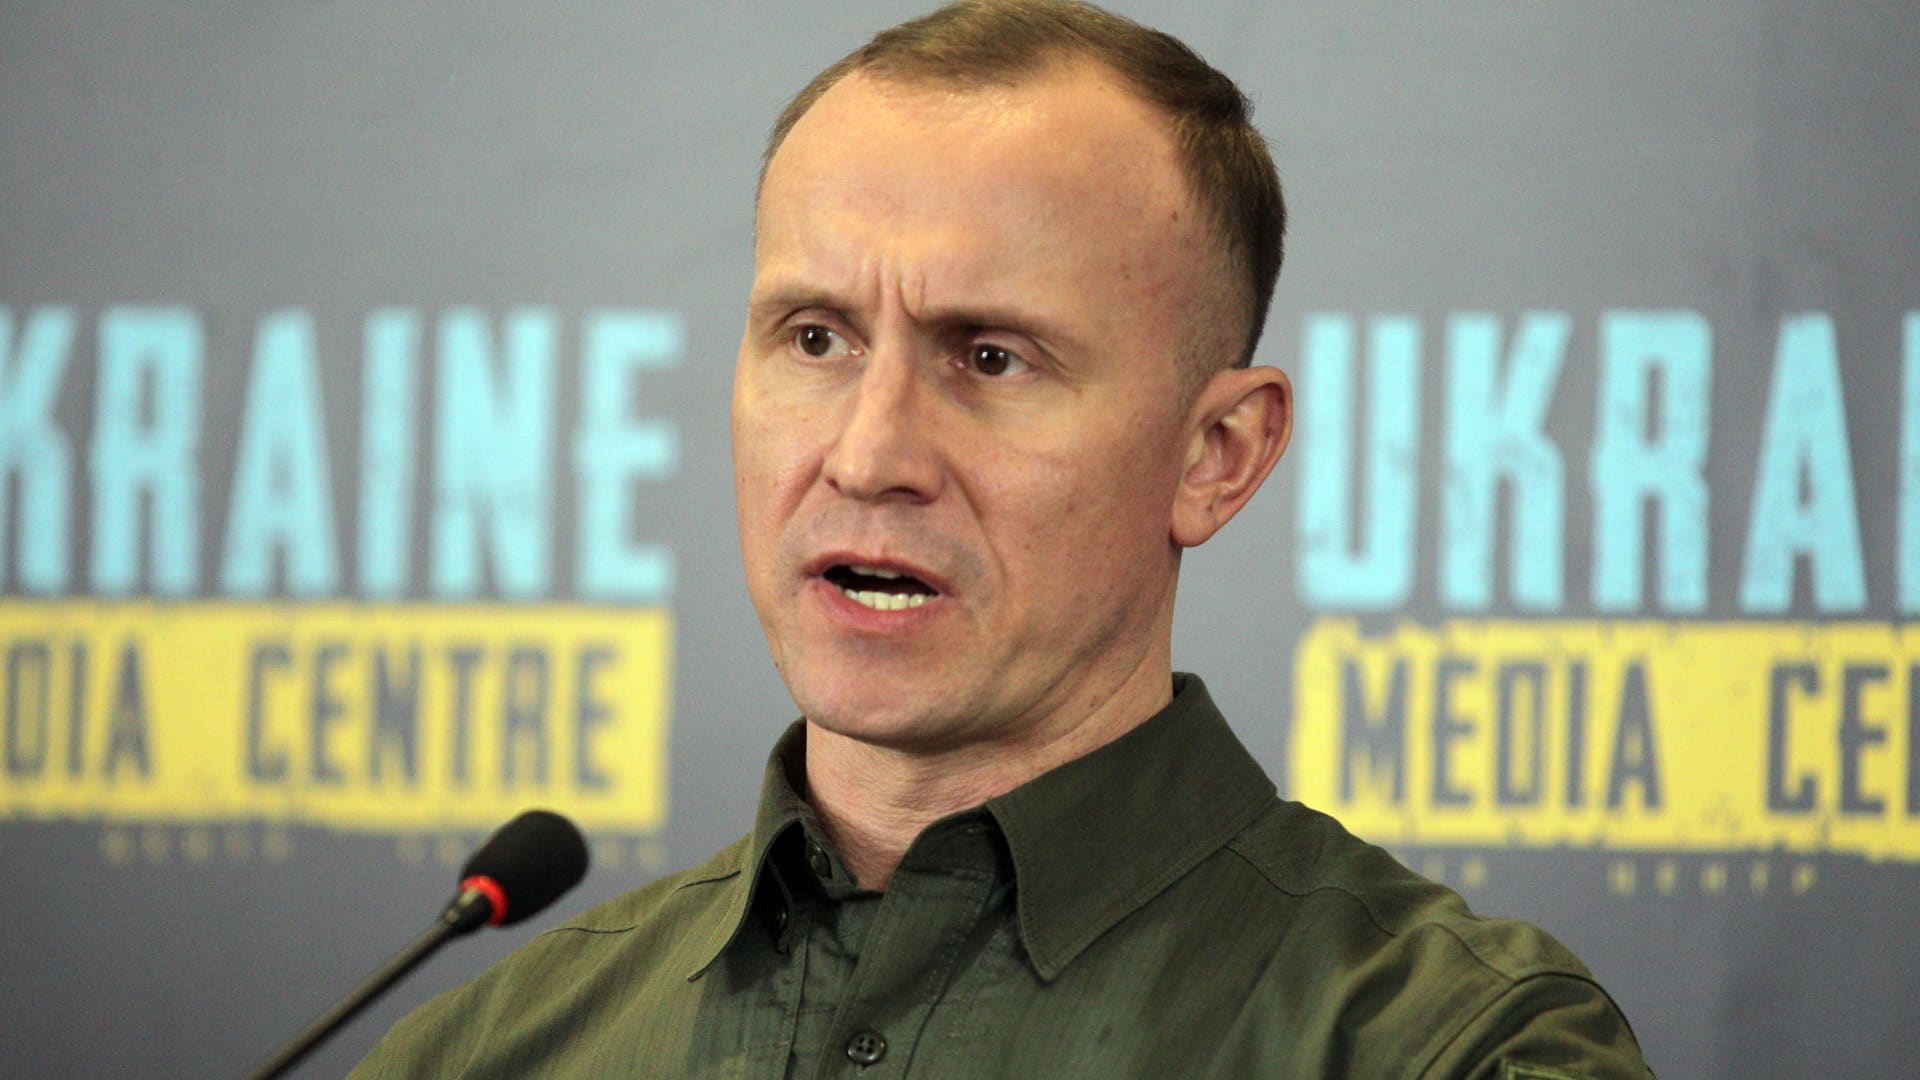 Chief of the Main Directorate of the National Police in the Kyiv region Andriy Nebytov commented on the inability of the Russian invaders to give a worthy rebuff to the armed forces of Ukraine, as well as commission of violent crimes and property theft by Russian soldiers in Kyiv's suburbs during a briefing in Kyiv, capital of Ukraine